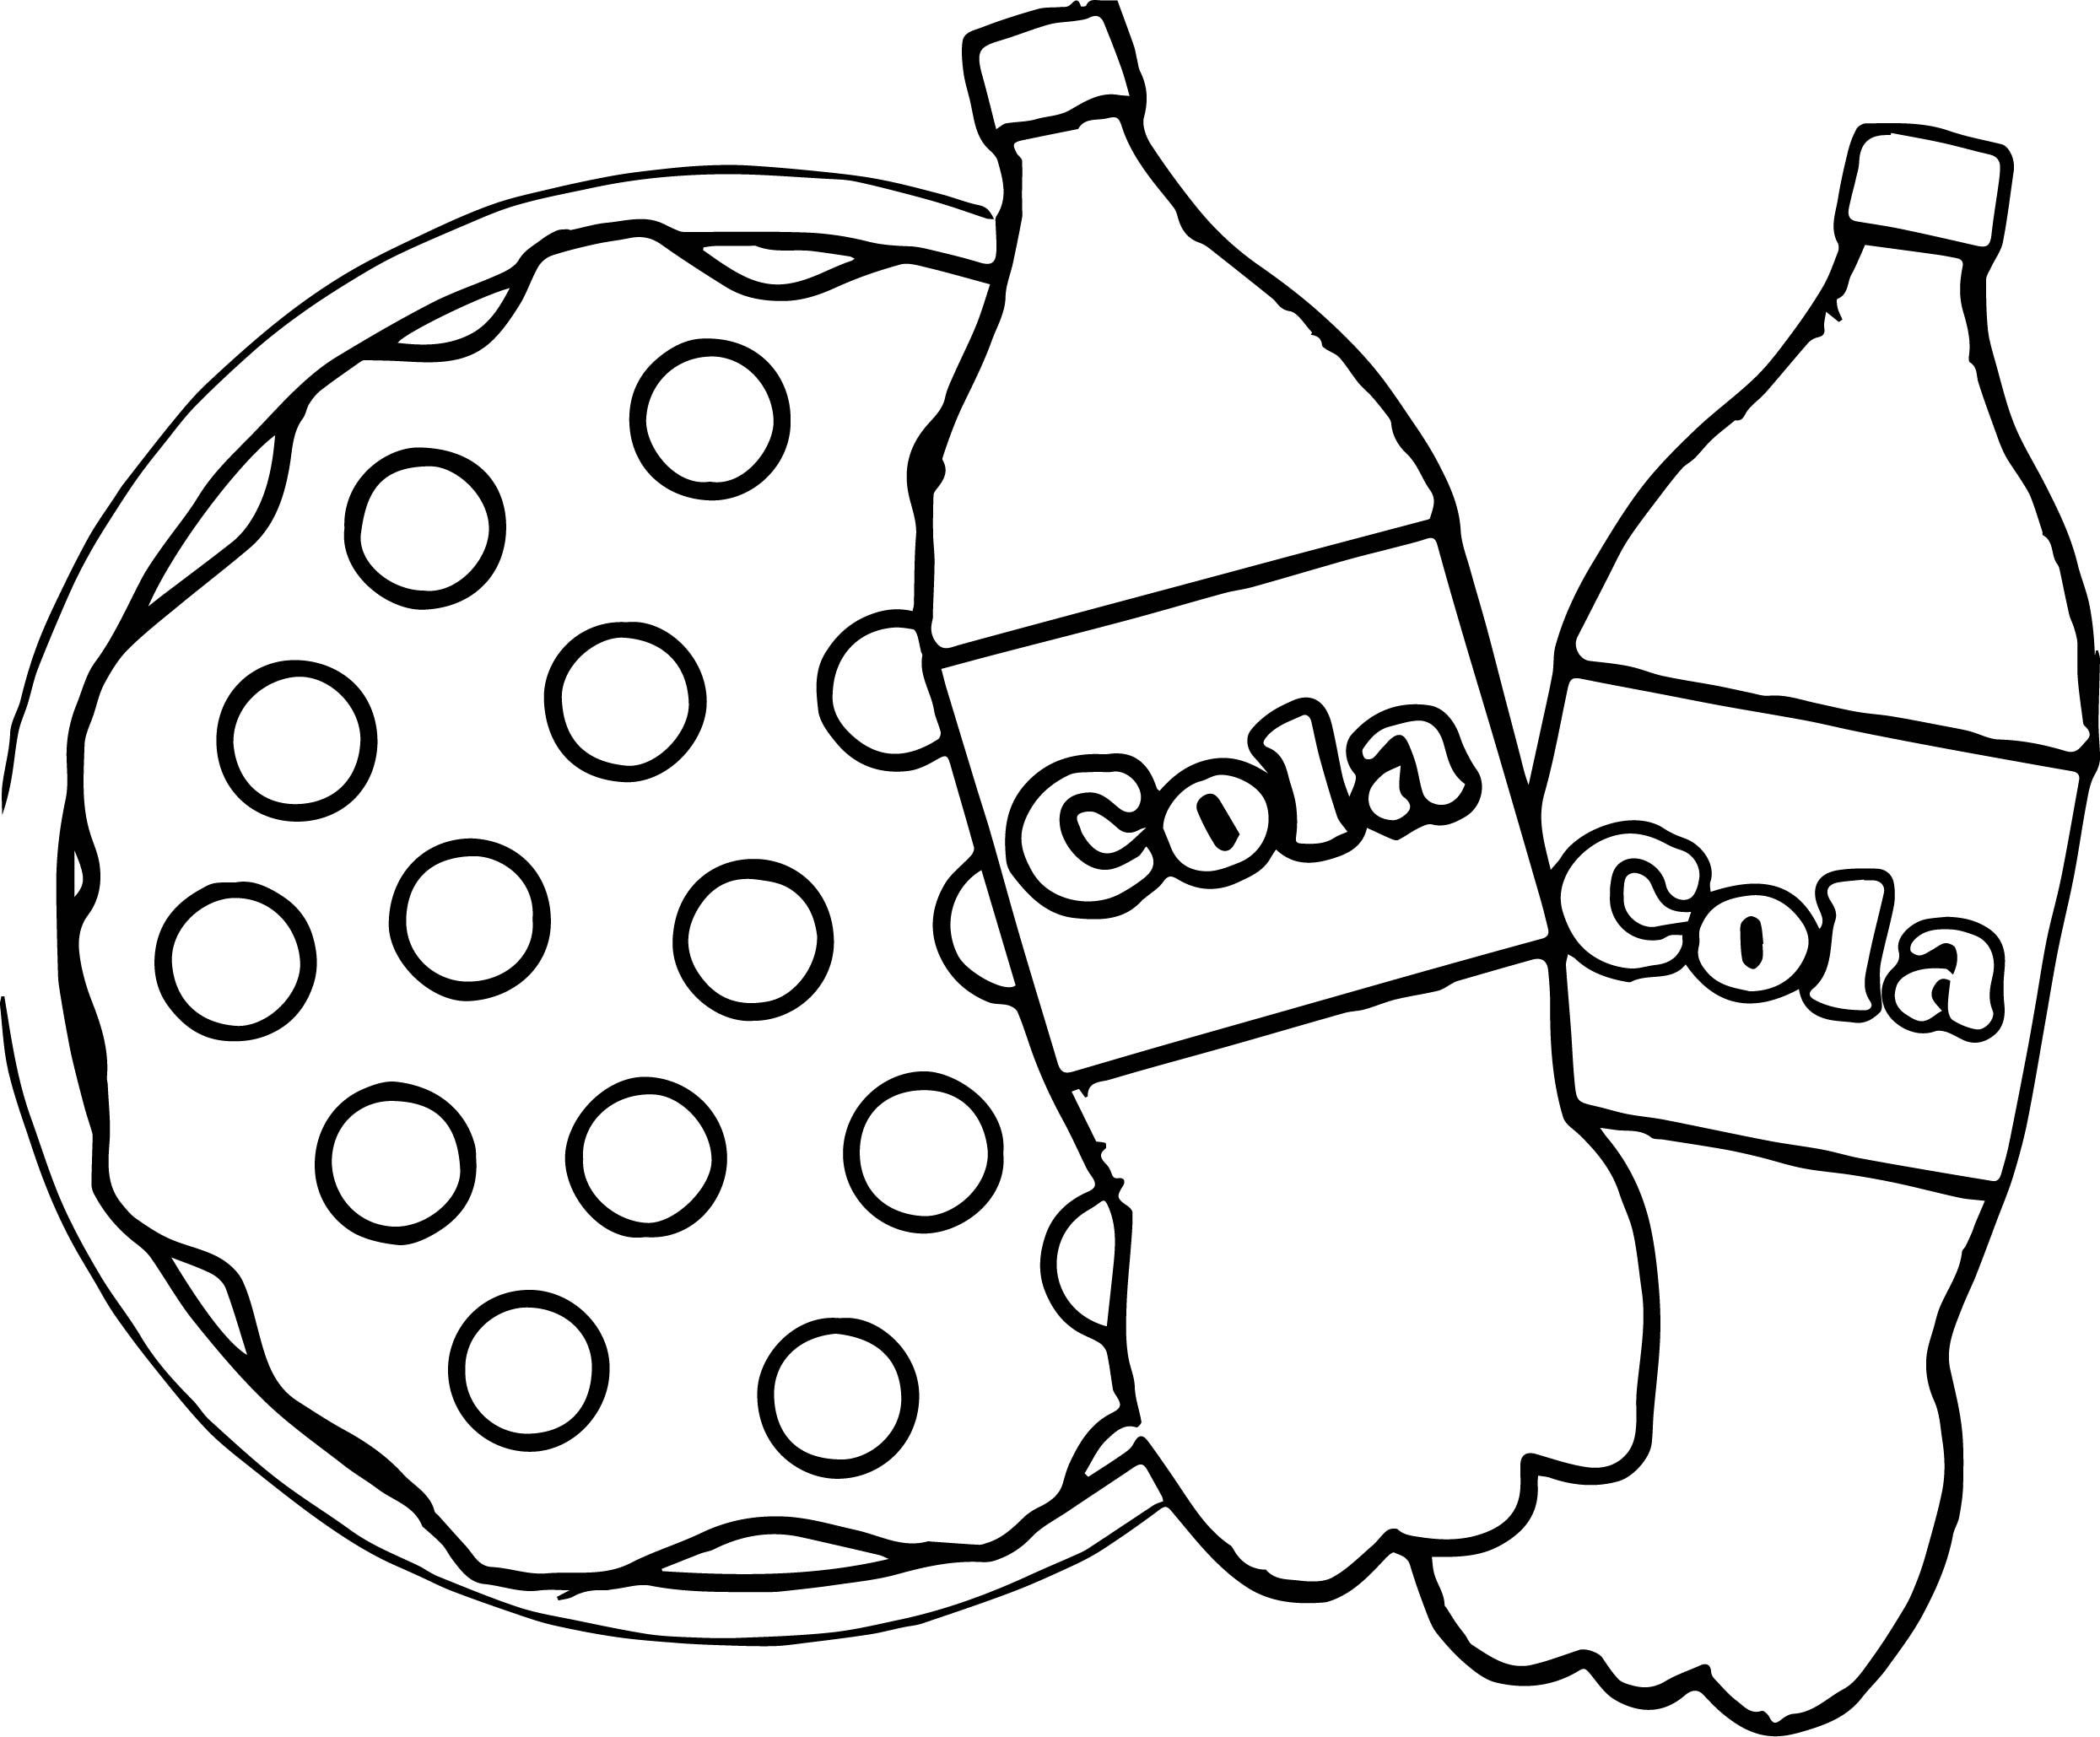 Cola Bottle coloring book to print and online